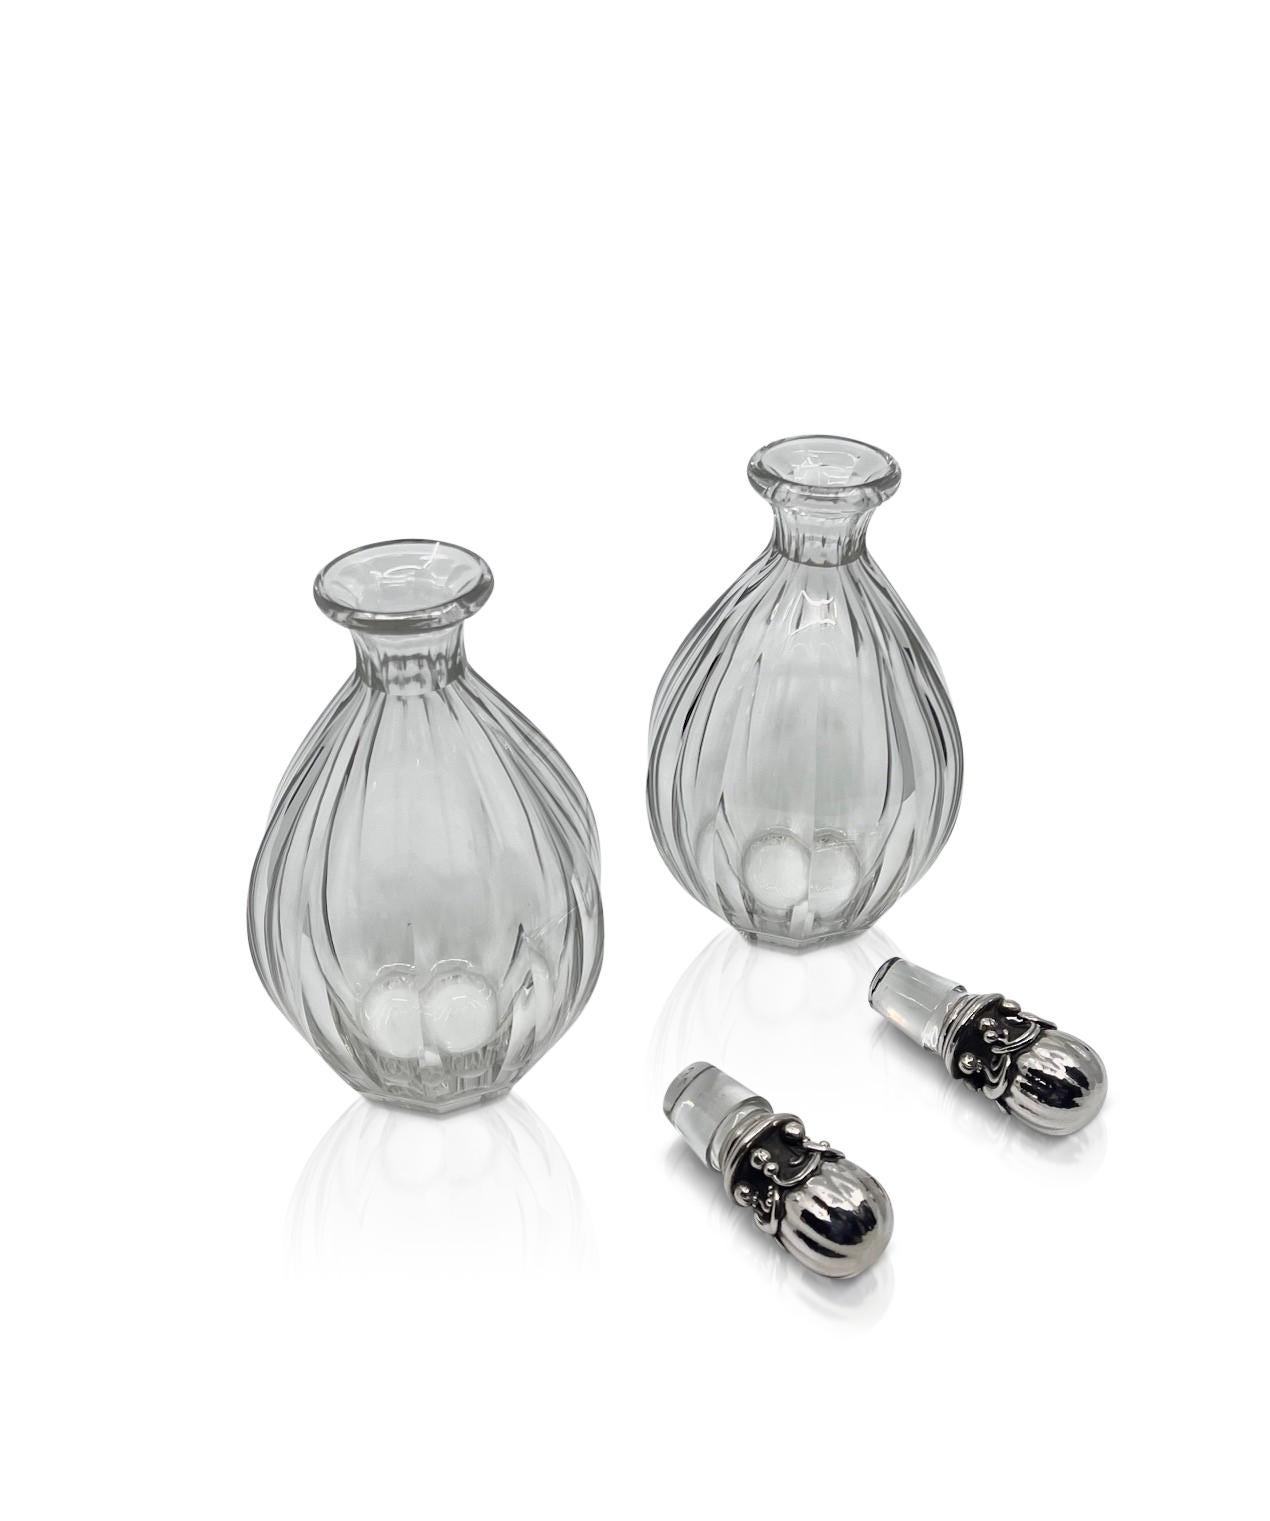 A matching pair of vintage Georg Jensen sterling silver ornate stoppers #100 by Georg Jensen and Baccarat crystal decanters. The heavy art nouveau stoppers are hand crafted with a great deal of hand chasing involved. Each hand hammered stopper with